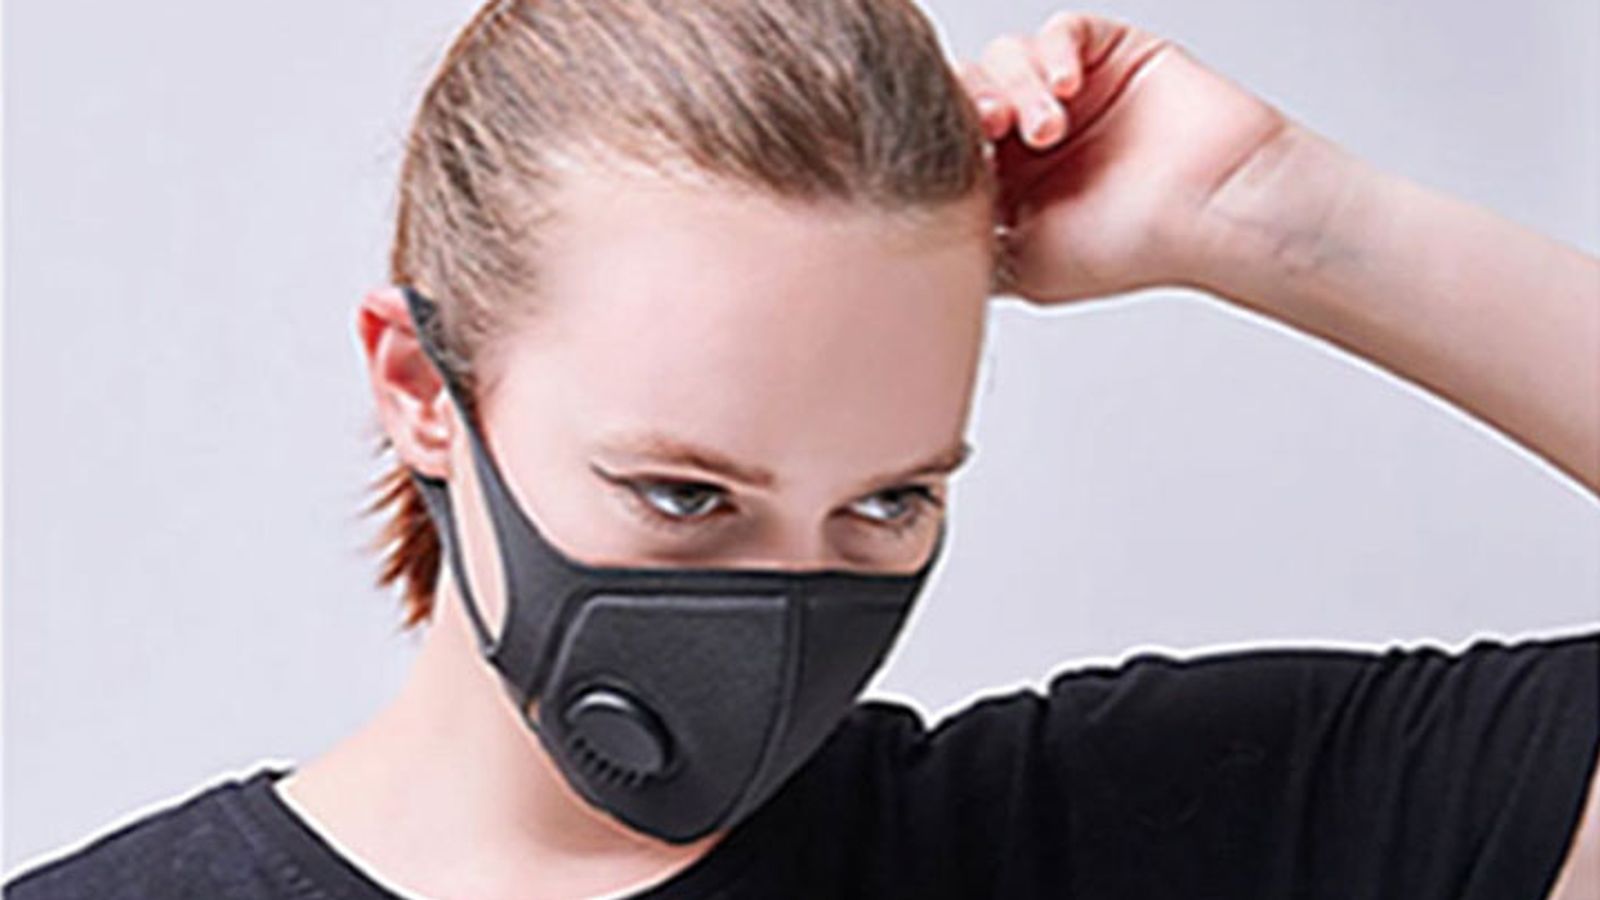 best face masks for covid 19 protection uk